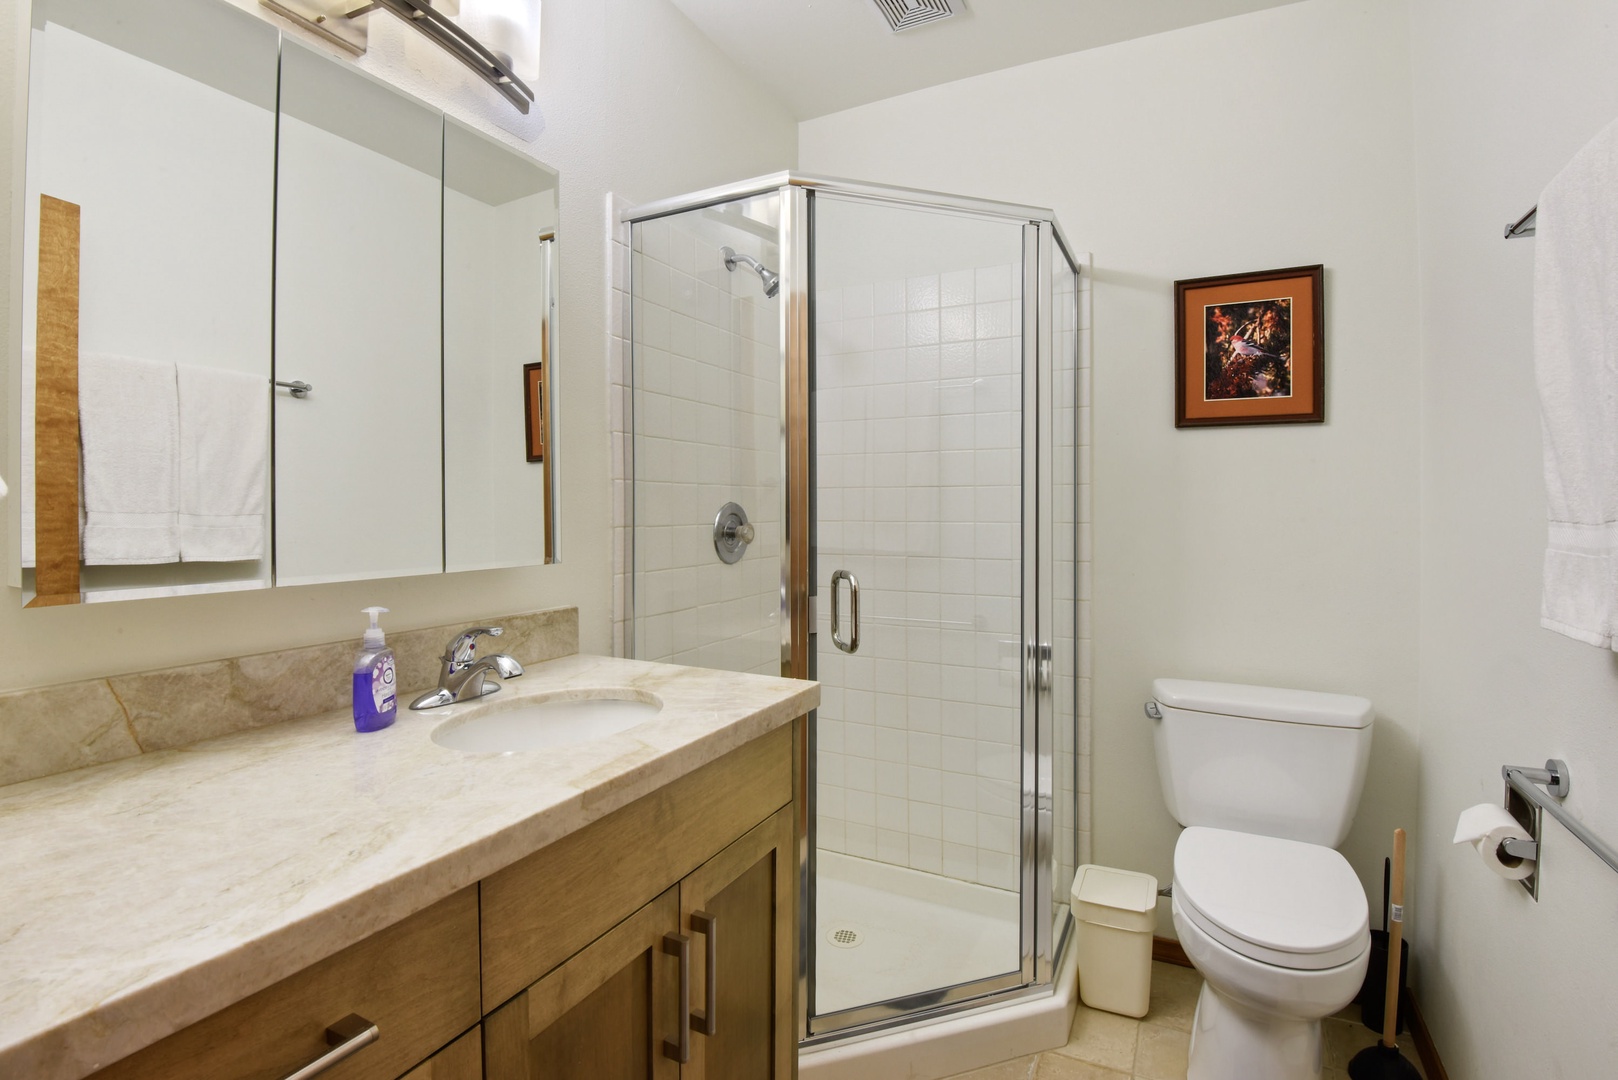 4th full bathroom with standing shower